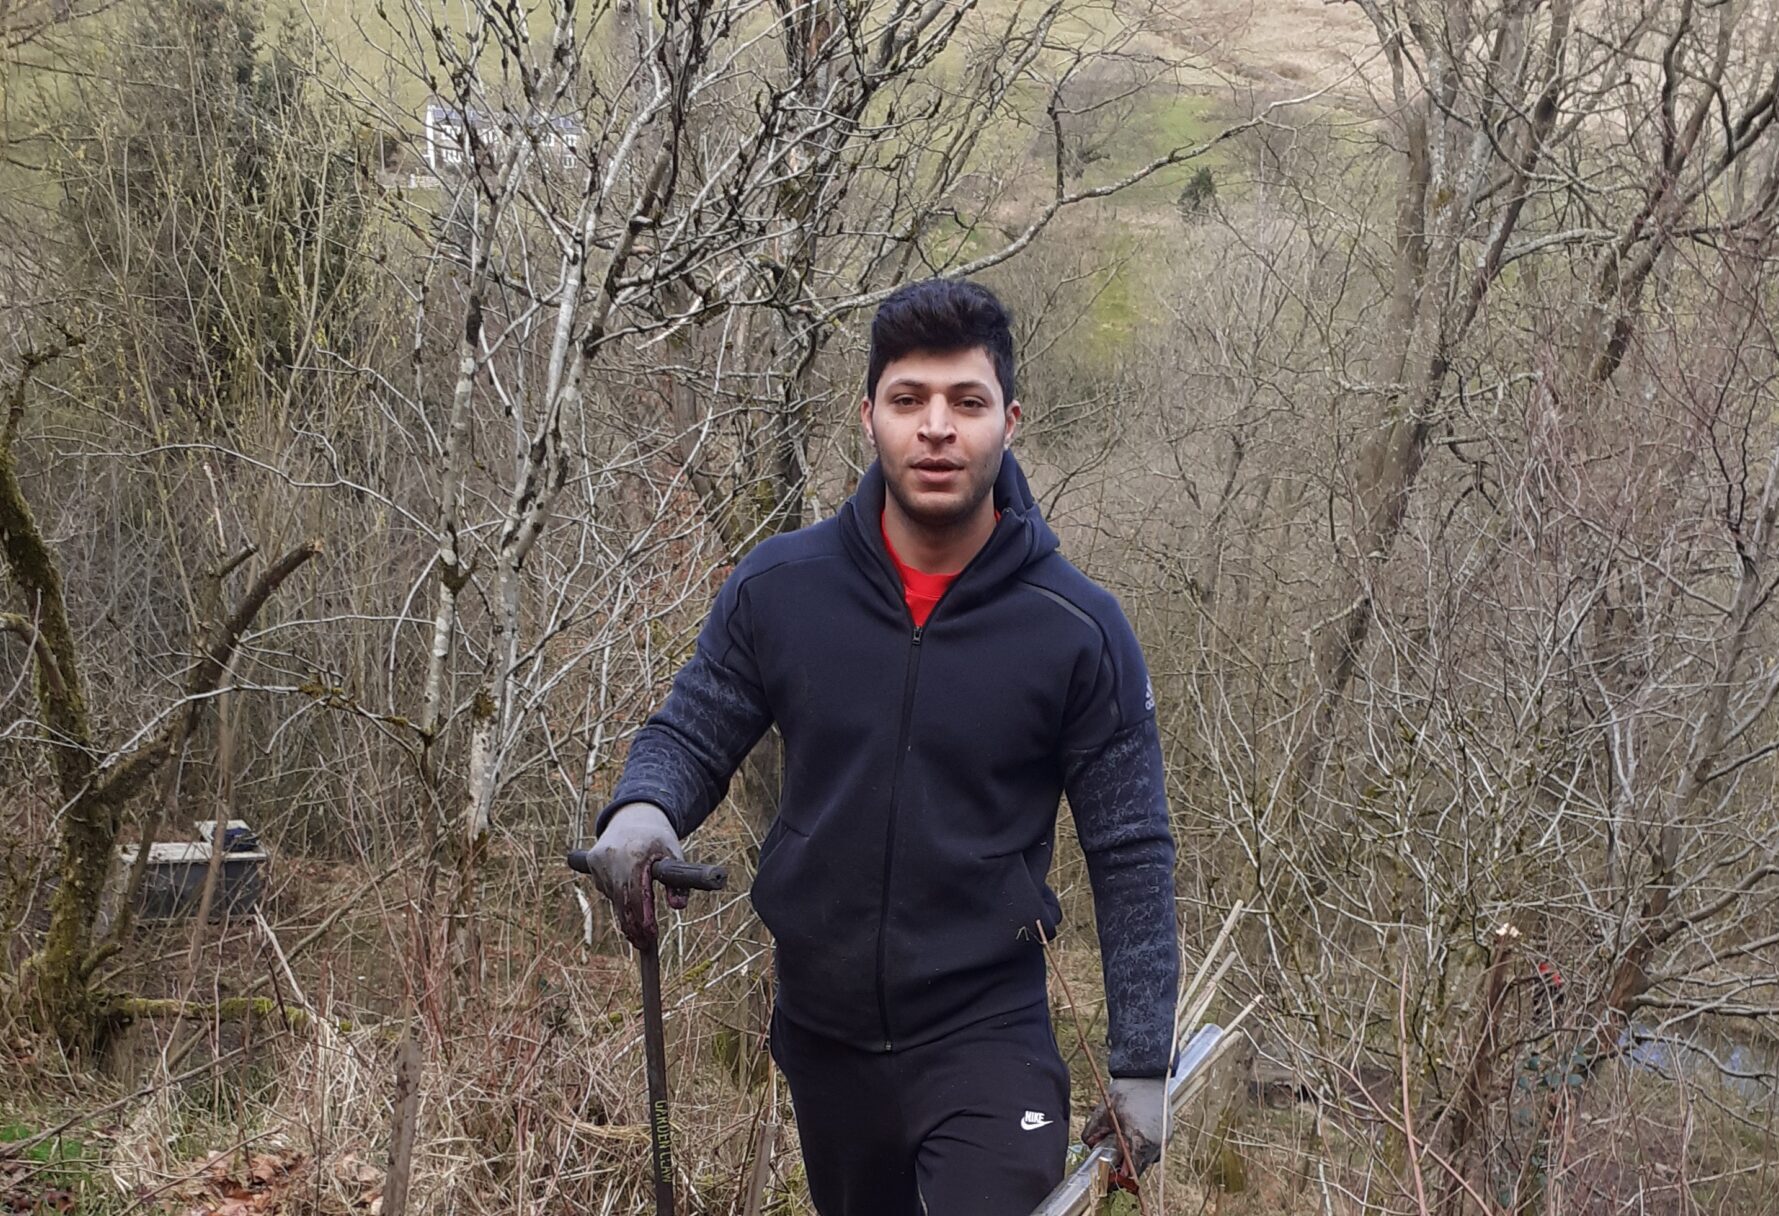 Planting trees in Pendle